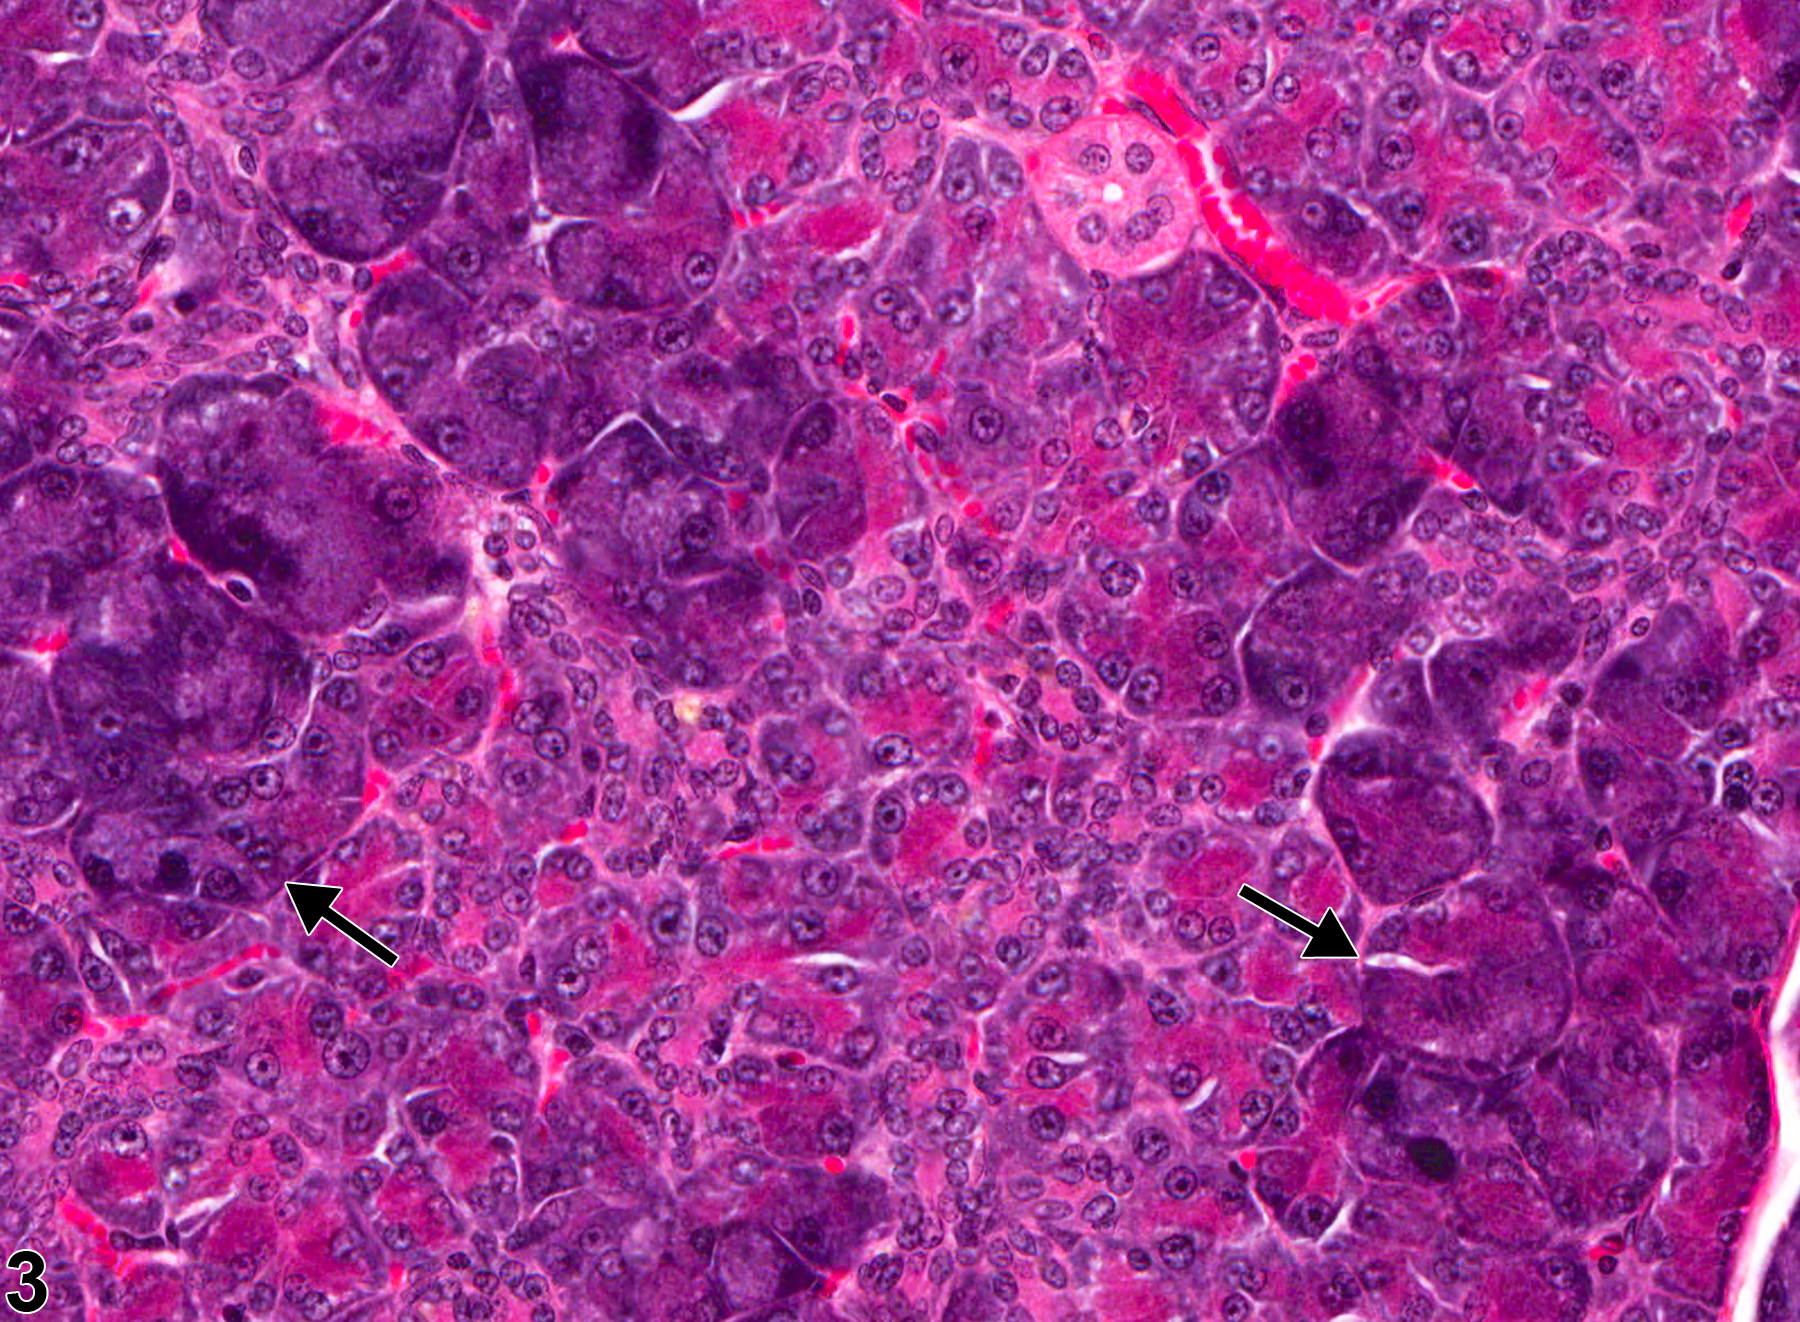 Image of basophilic hypertrophic focus in the parotid salivary gland from a male F344/N rat in a chronic study